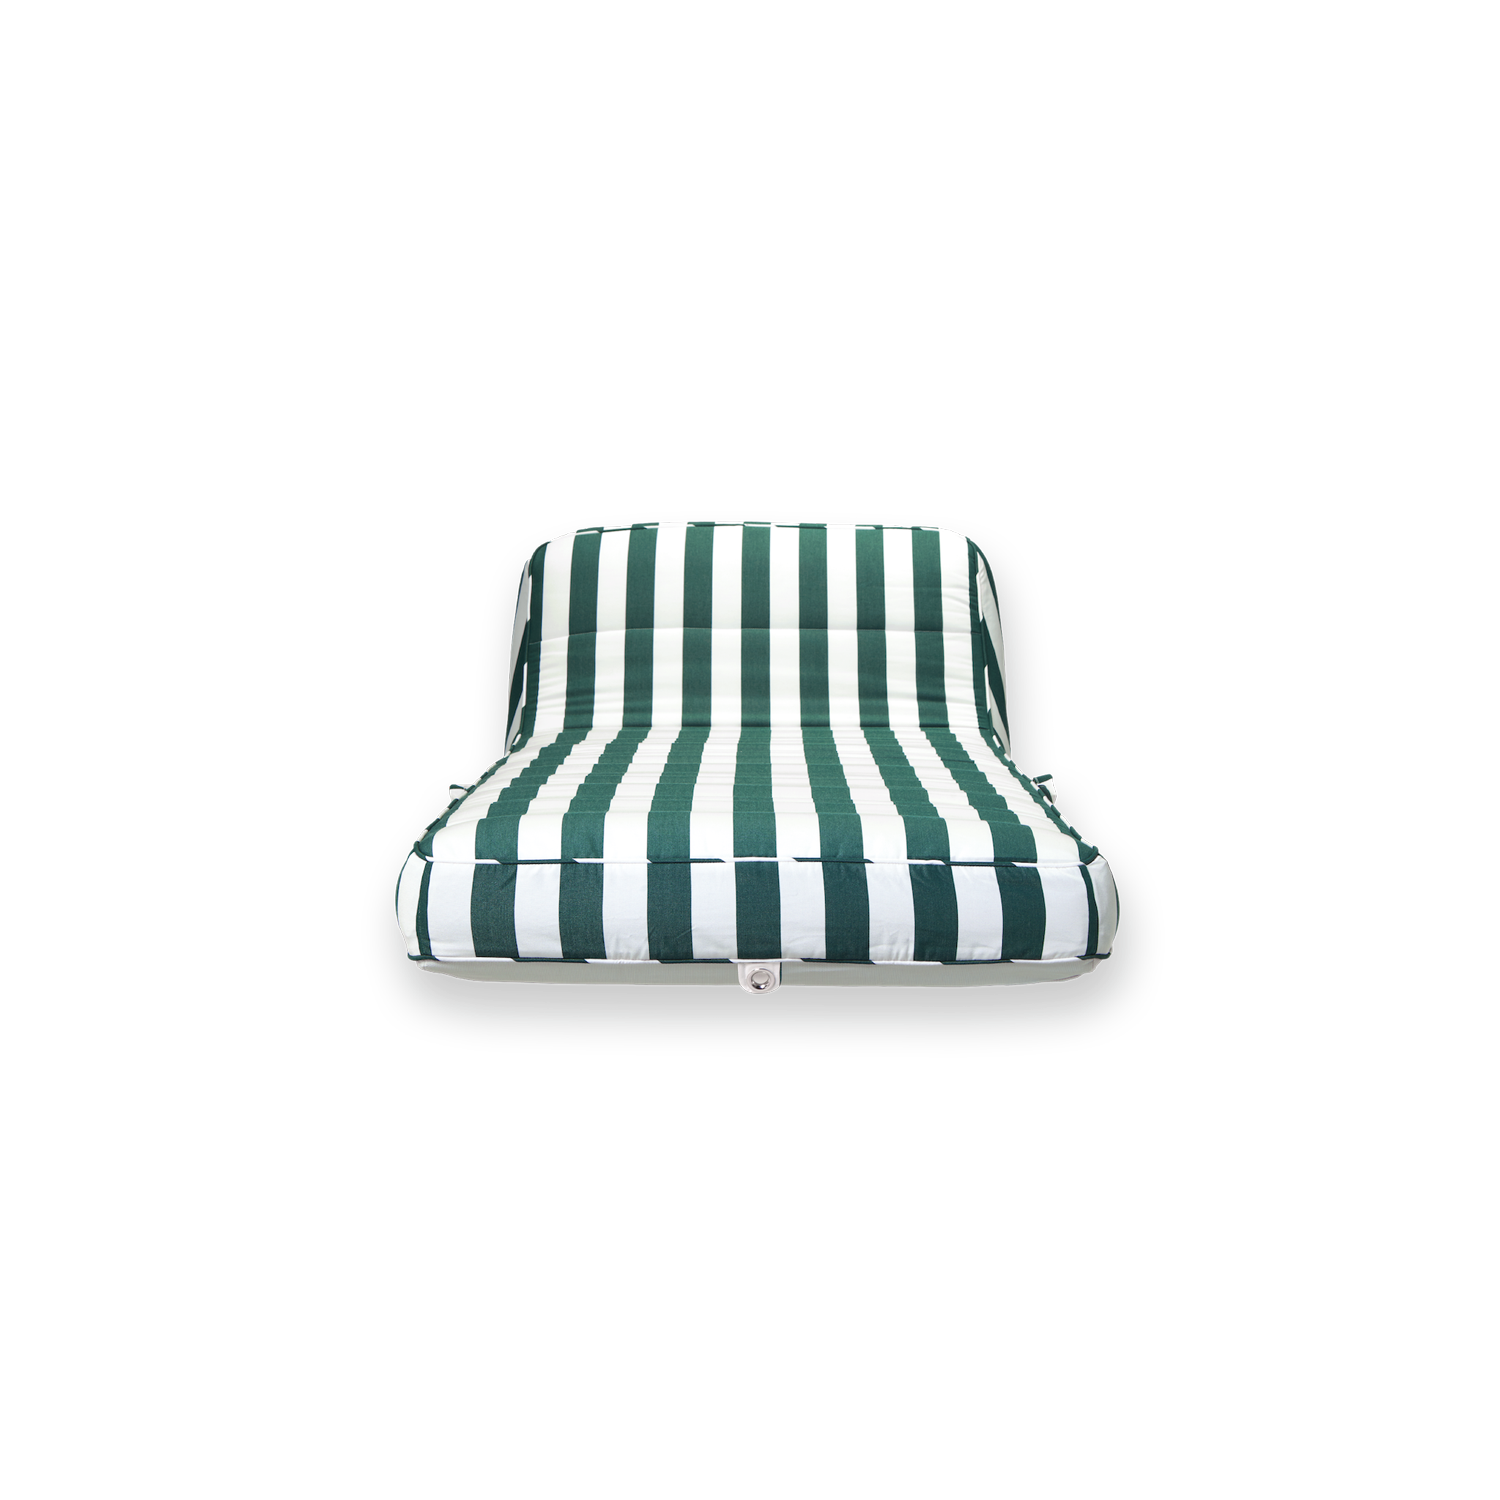 The front profile of a single green and white striped luxury pool float.